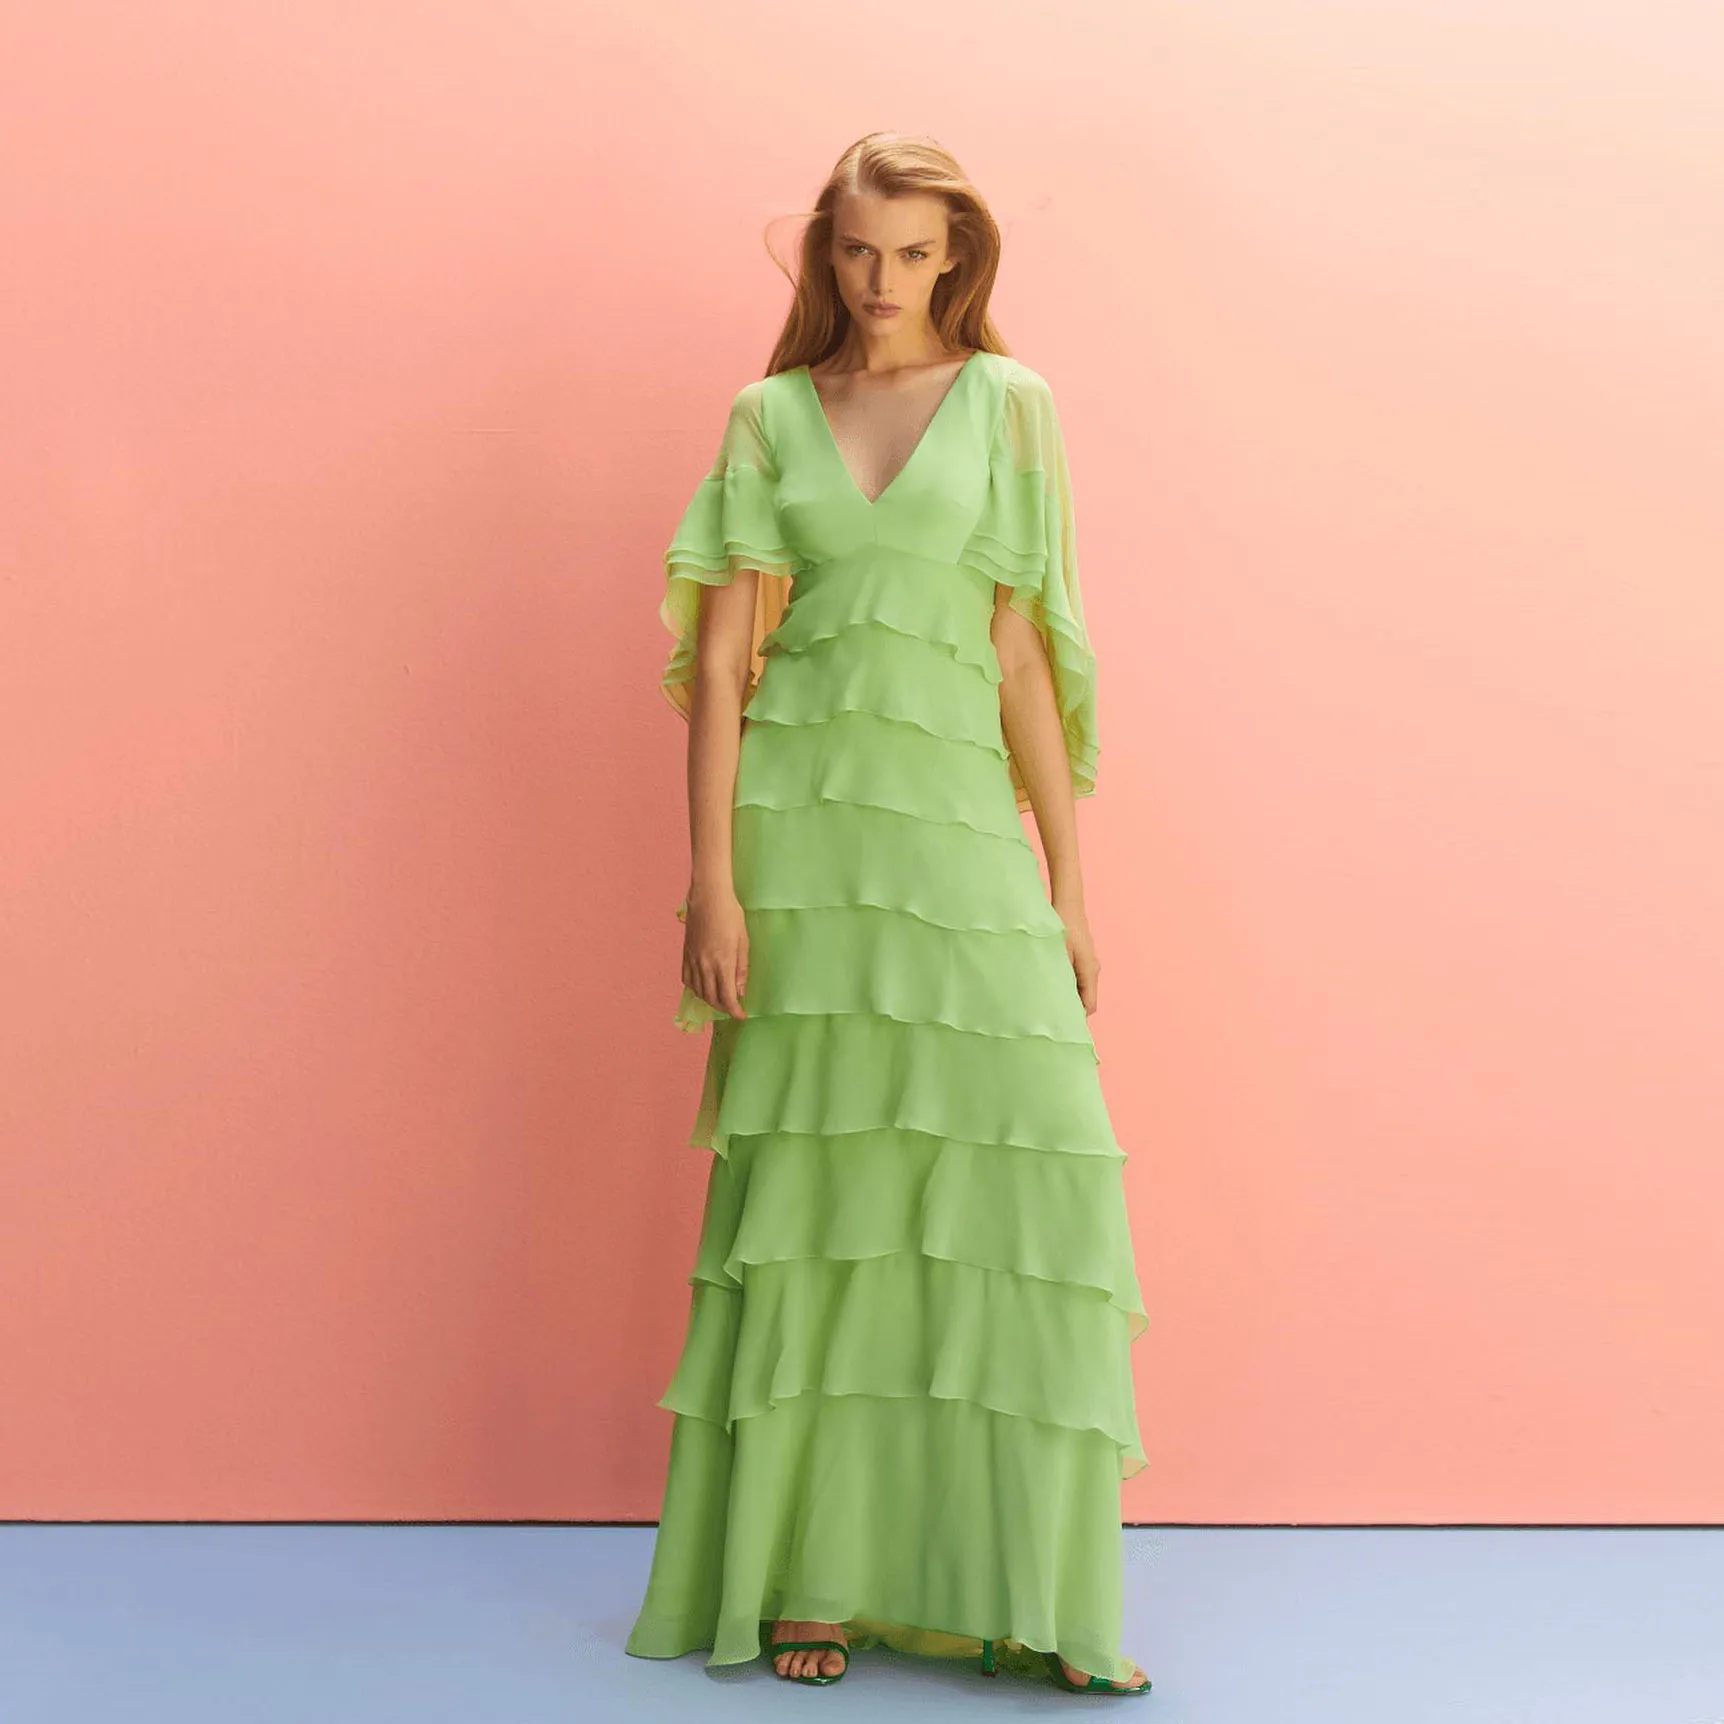 

Modest Mint Green Chiffon Long Women Dresses V-neck A-line Female Maxi Dress With Short Sleeves Tiered Chiffon Maxi Gowns